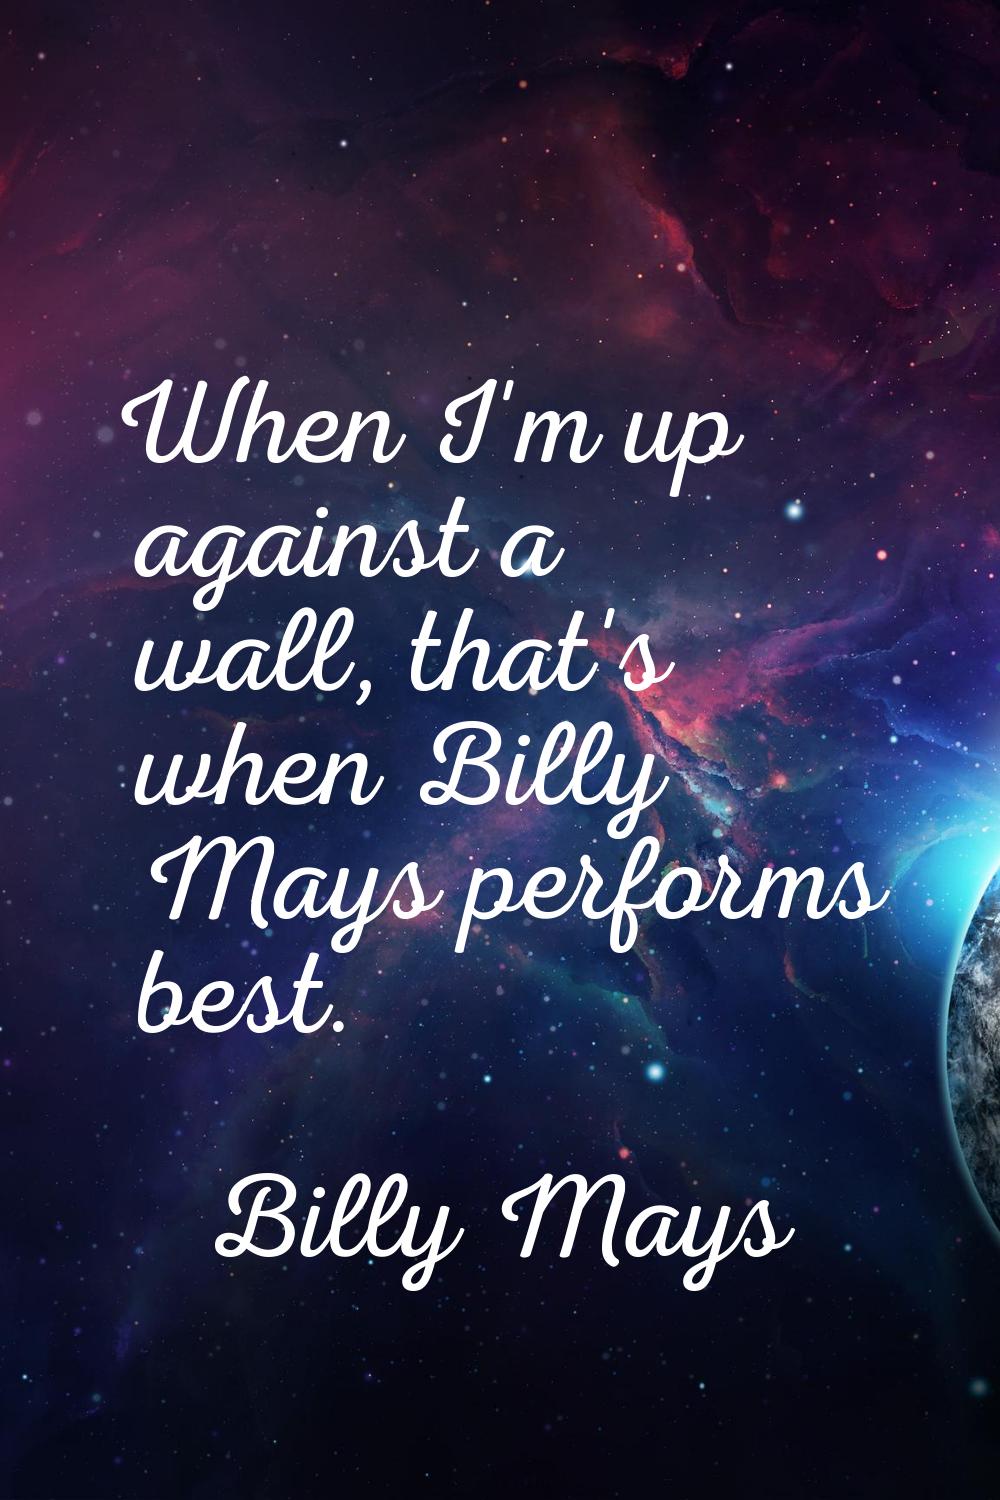 When I'm up against a wall, that's when Billy Mays performs best.